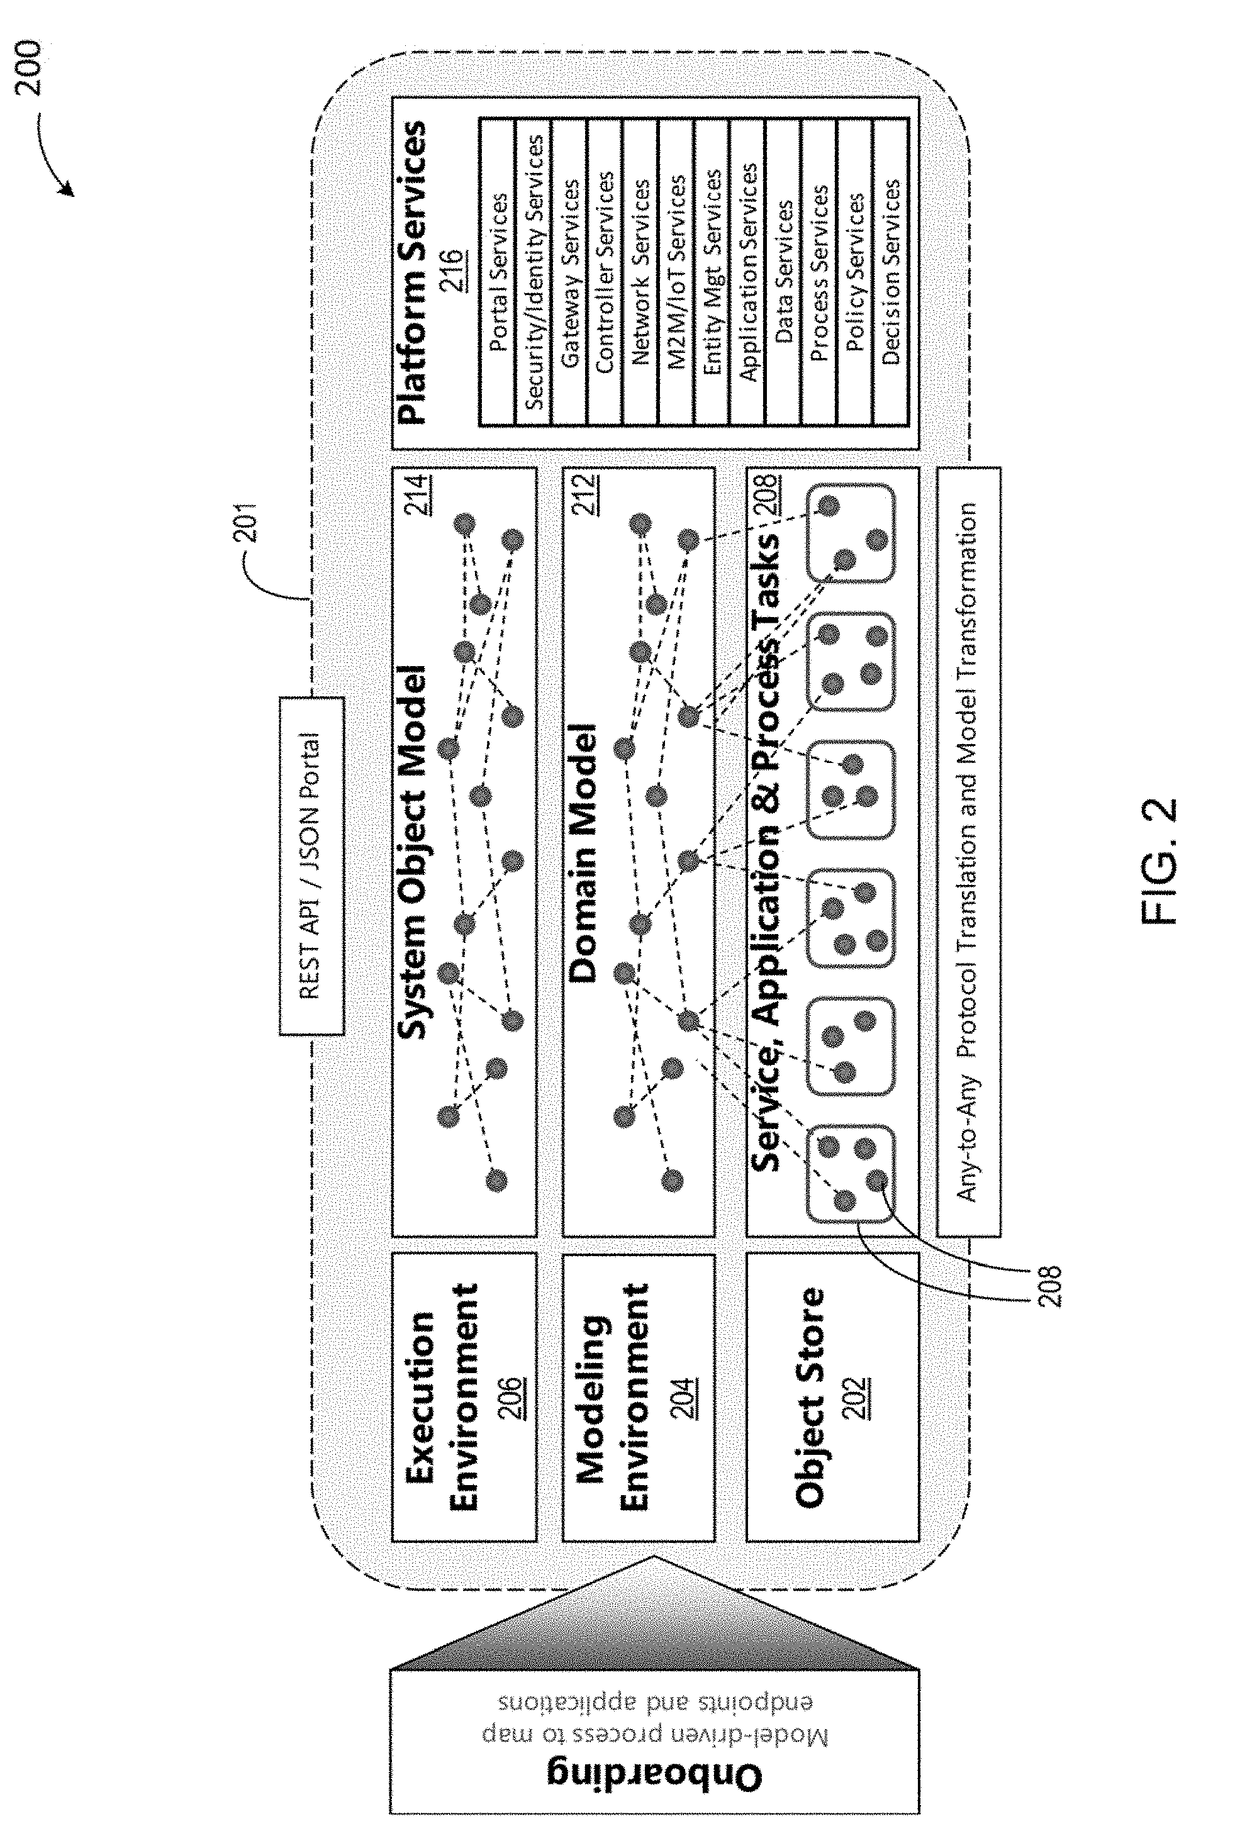 Systems and methods for domain-driven design and execution of metamodels